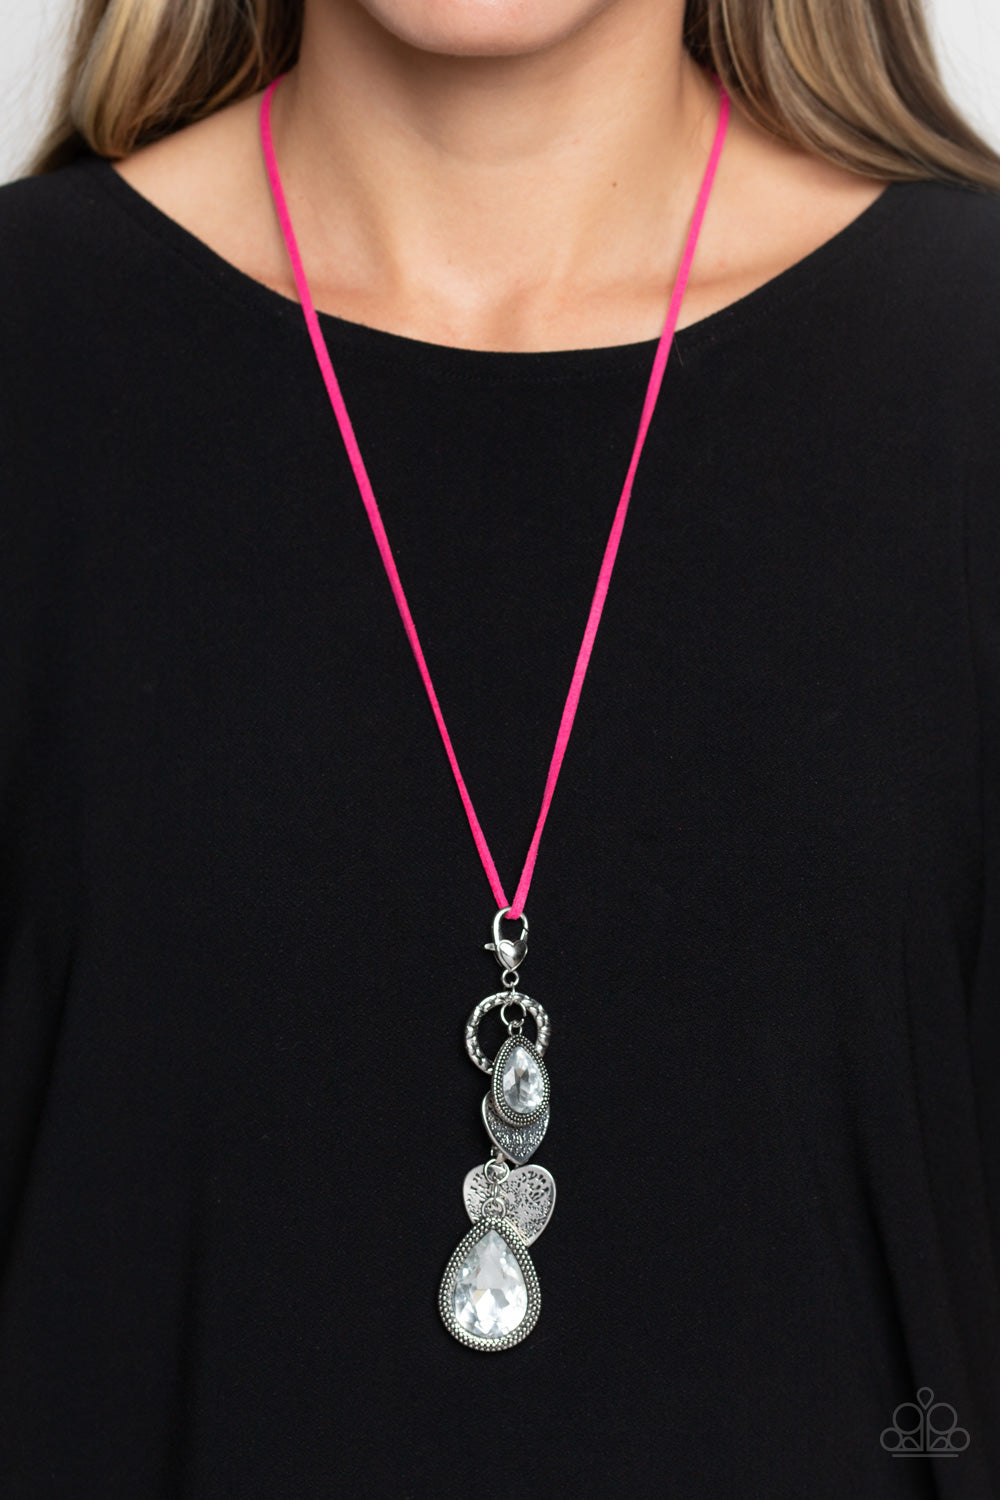 Casanova Clique Paparazzi Accessories Necklace with Earrings - Pink